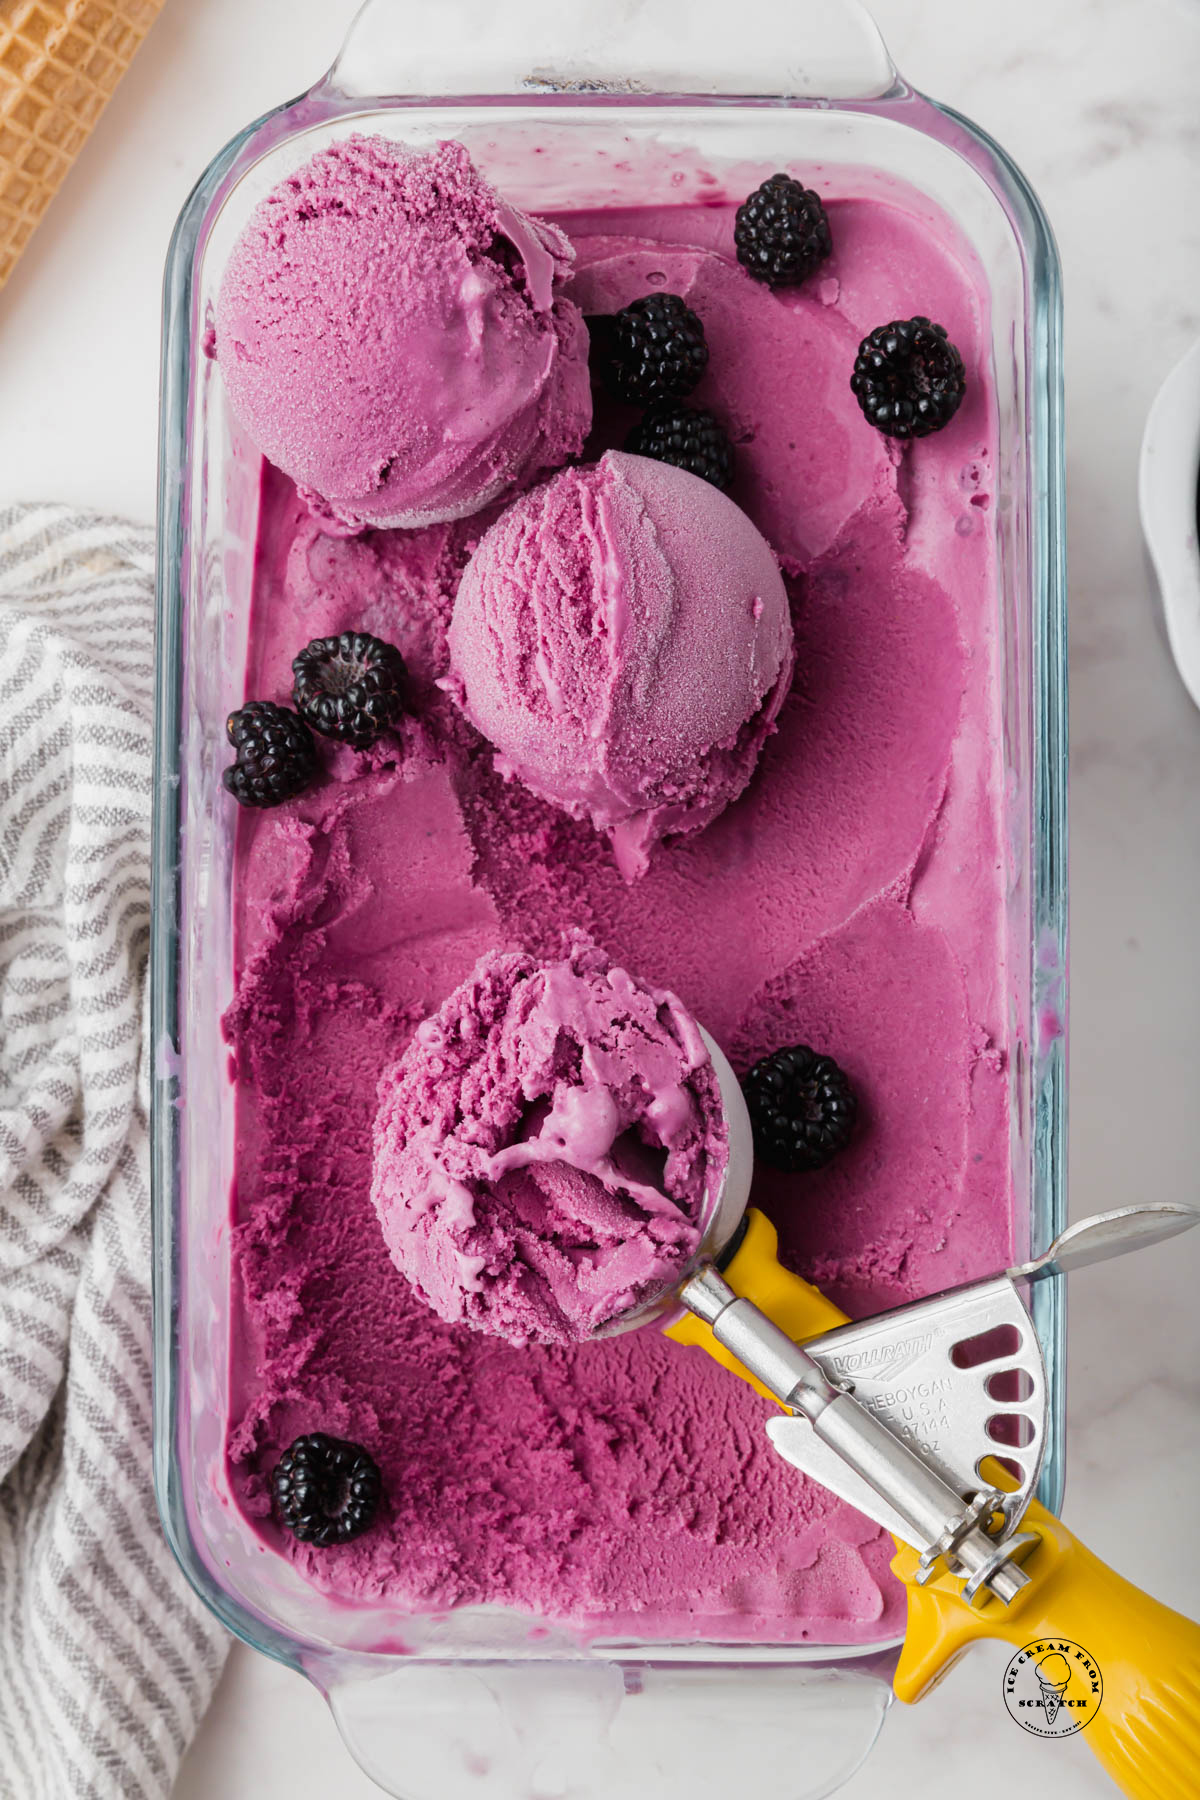 a glass loaf pan of homemade blueberry ice cream, an ice cream scoop is serving it, and fresh blackberries are sprinkled over.